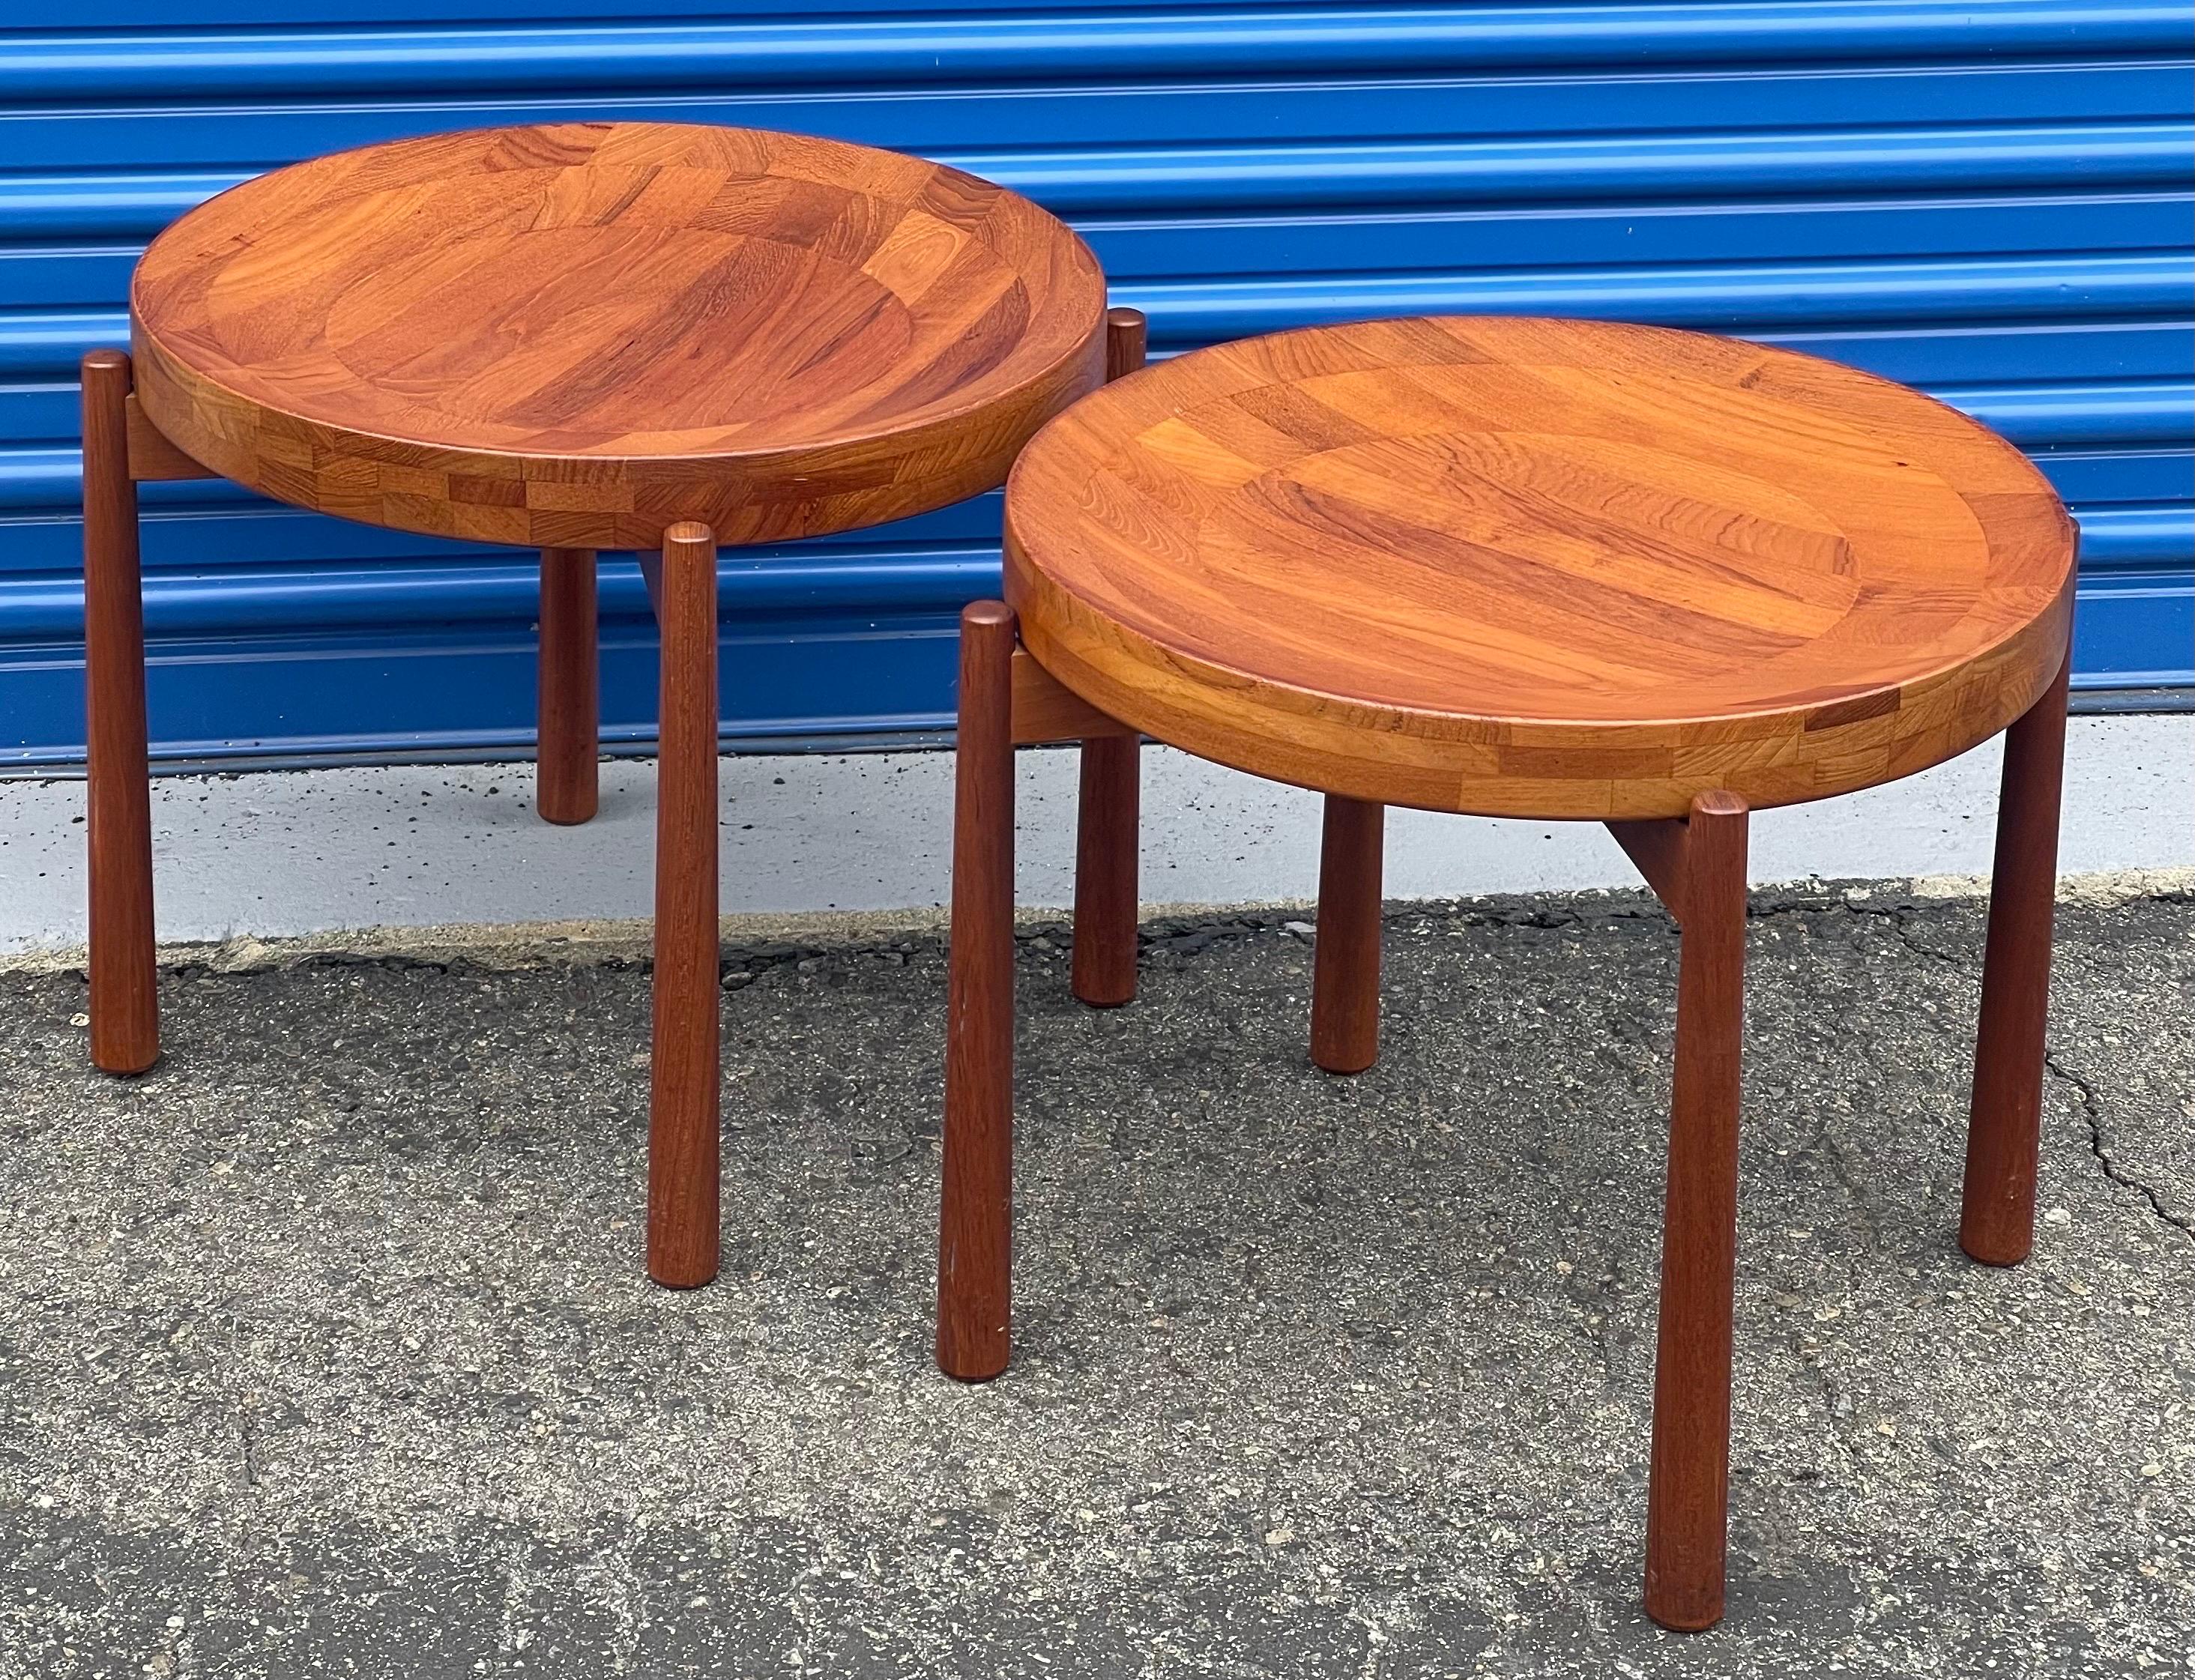 20th Century Pair of Teak Tray Side Tables Attributed to Jens Quistgaard for DUX of Sweden For Sale